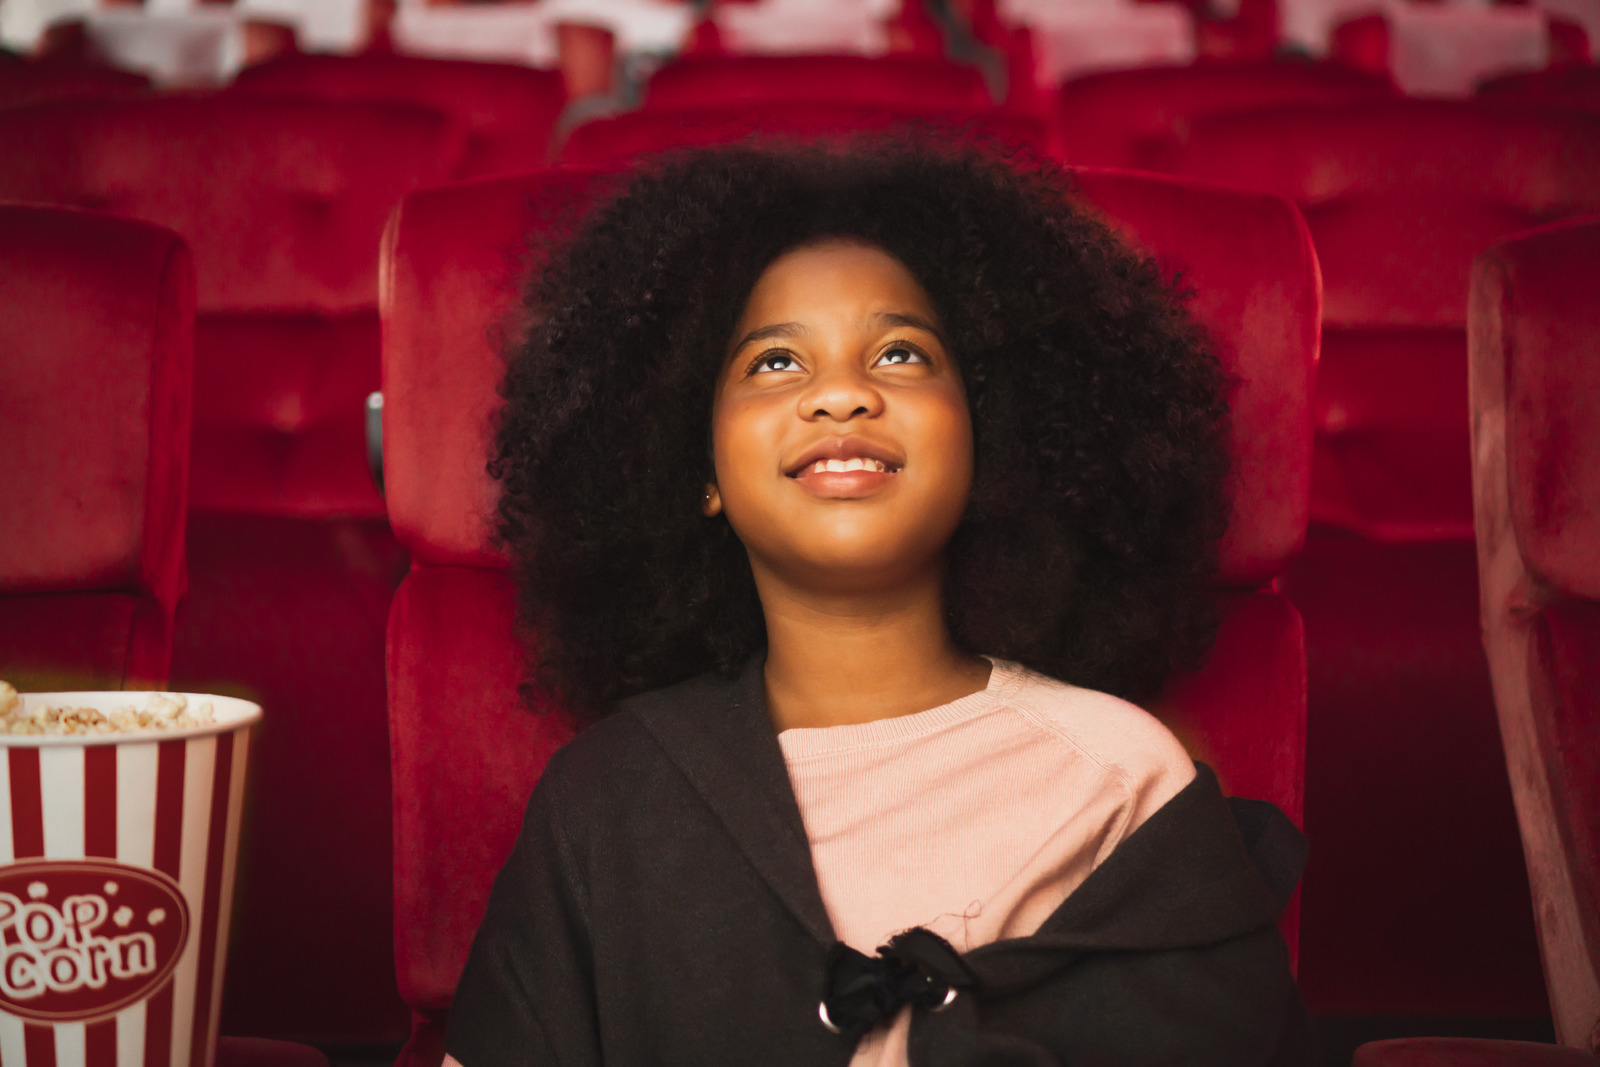 Maryland’s Only Black-Owned Movie Theater Celebrates One Year Anniversary